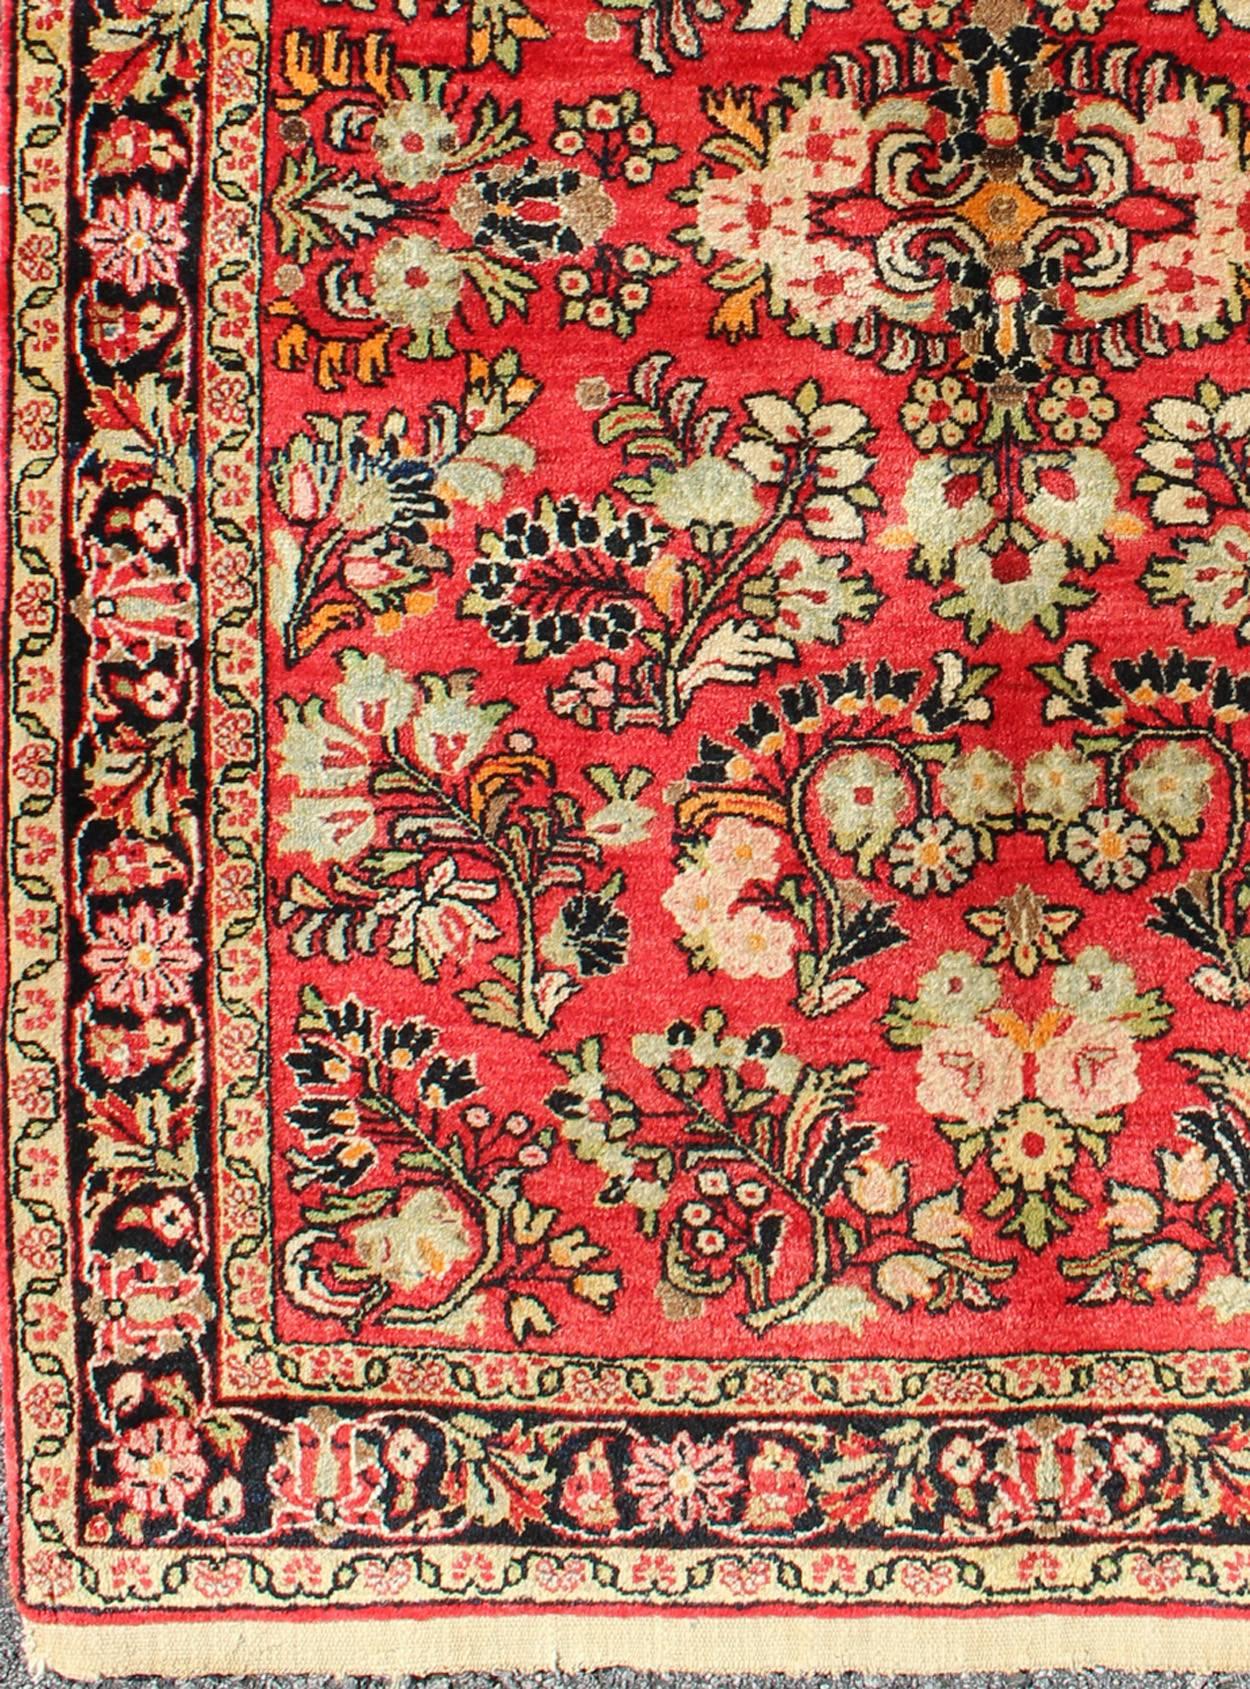 Vitnage Persian Sarouk rug with all-over Floral design in rich red, onyx black, rug got-403, country of origin / type: Iran / Sarouk, circa 1930's
This immaculately woven early-20th century Sarouk rug represents one of the best in the world of